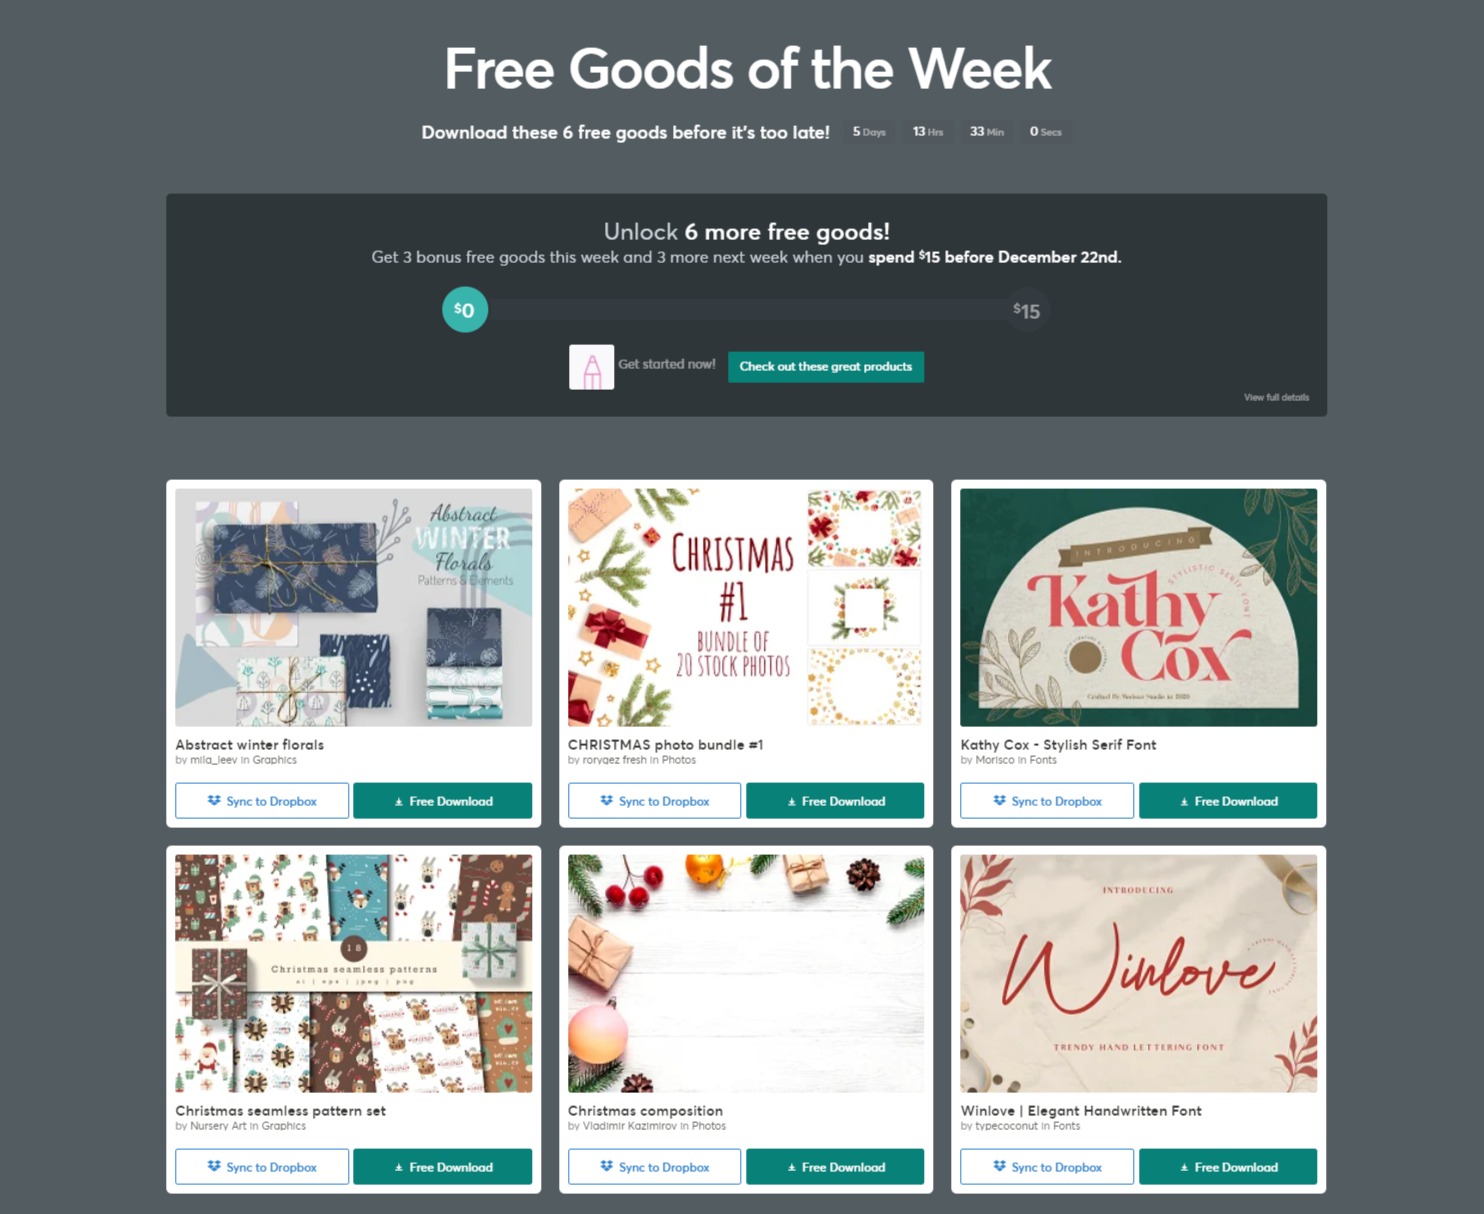 Free Goods of the Week